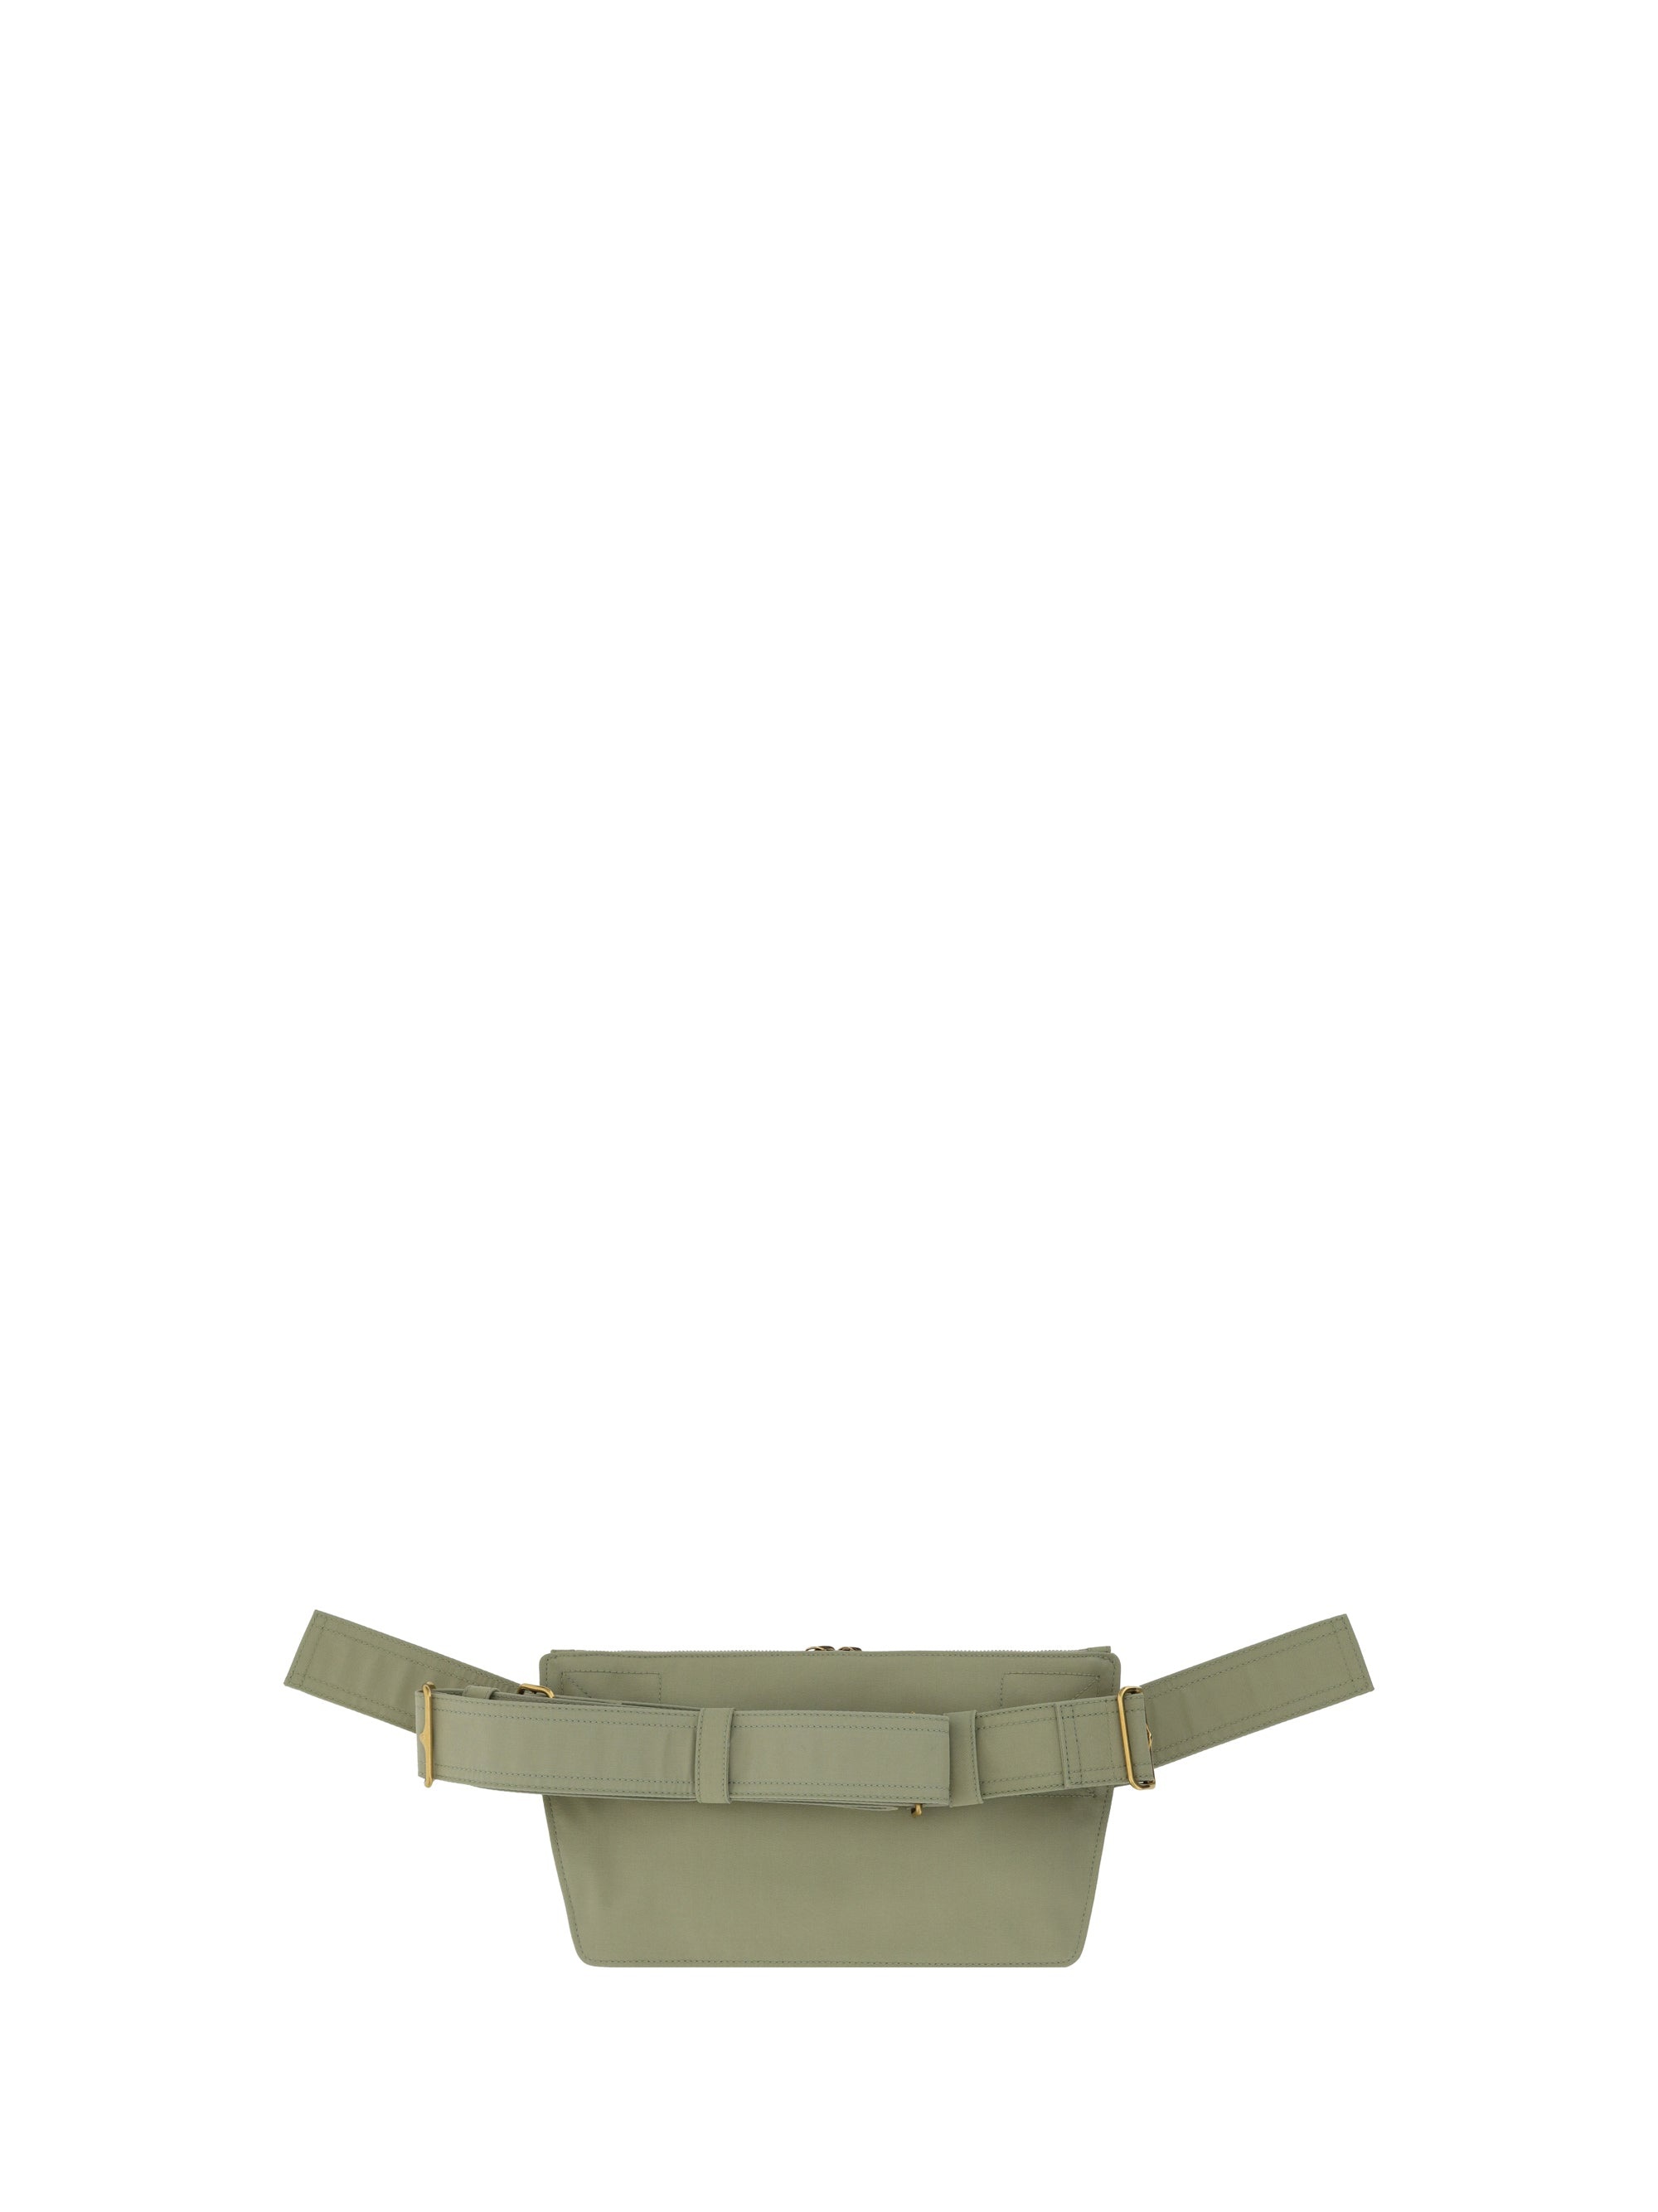 Burberry Men Trench Fanny Pack - 2